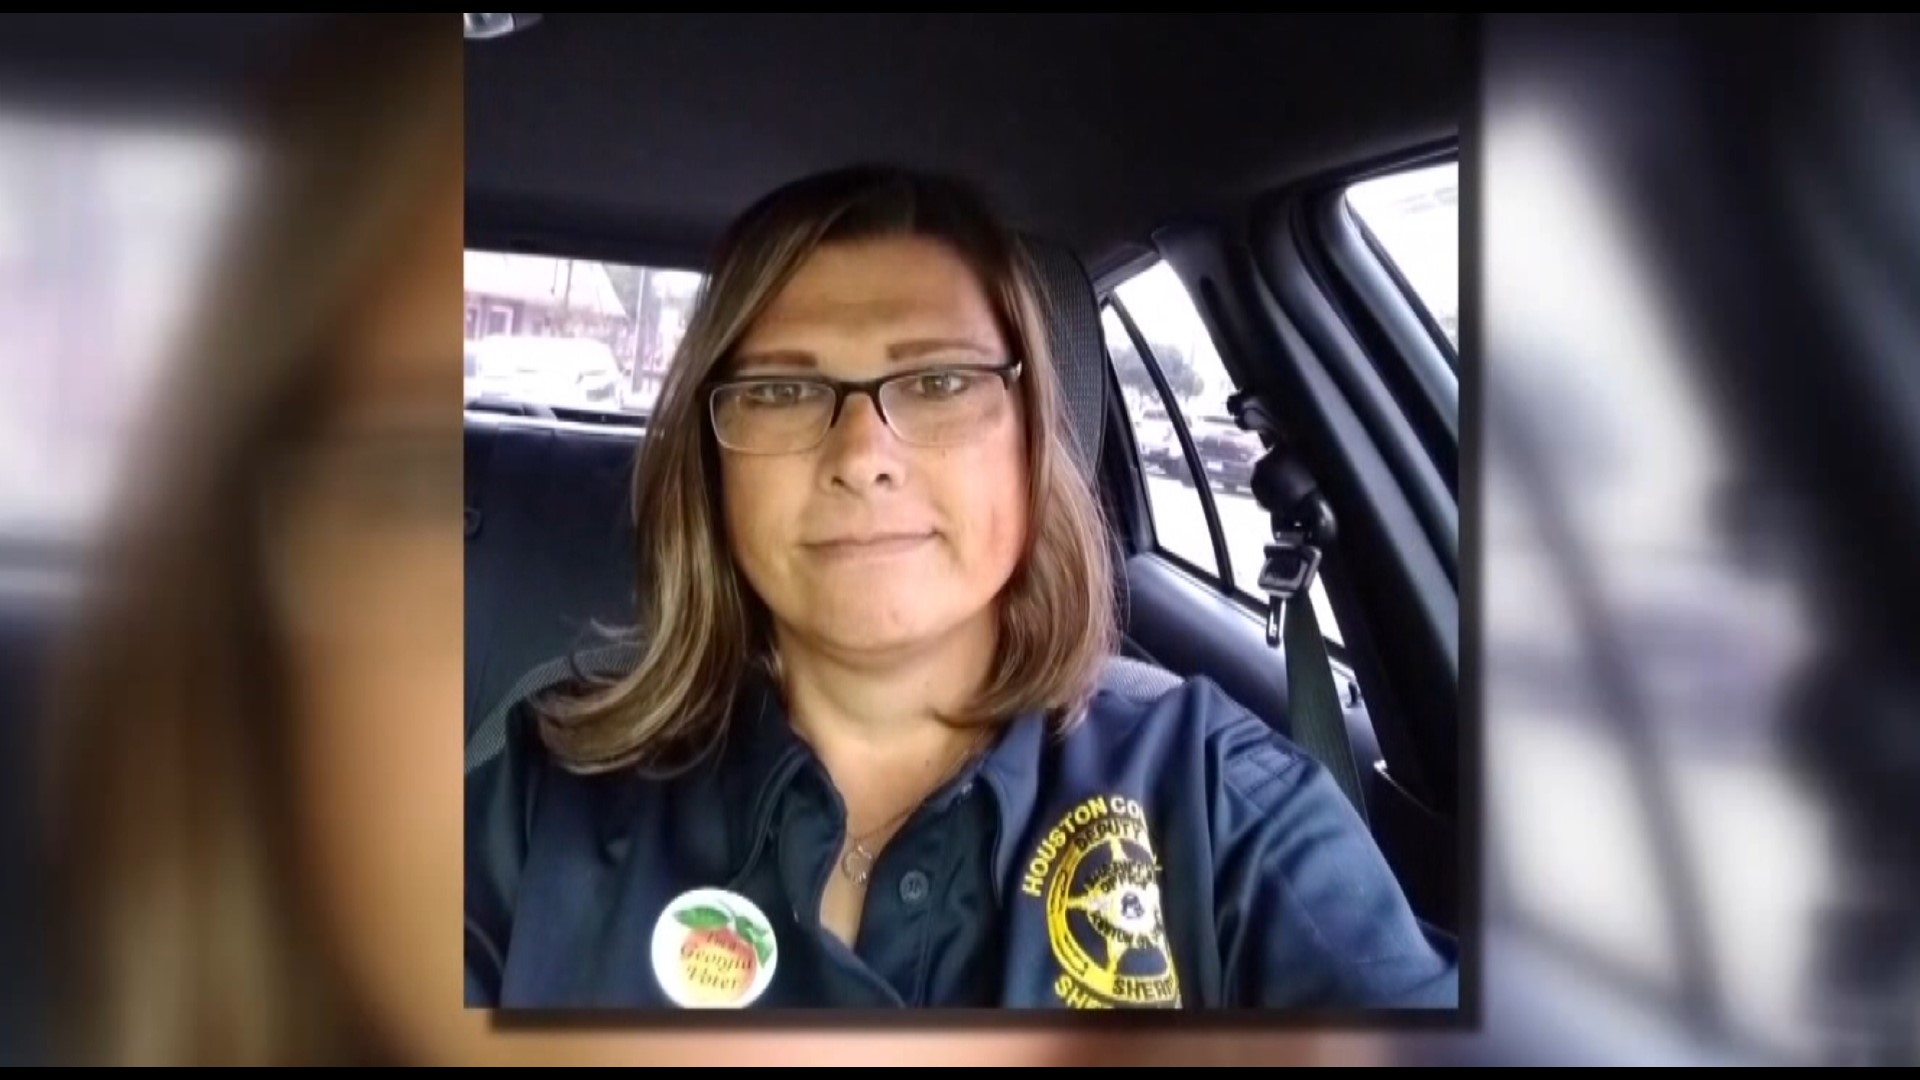 In 2019 sheriff's investigator Anna Lange sued the county and the sheriff because they refused to pay for her gender-affirming medical care.